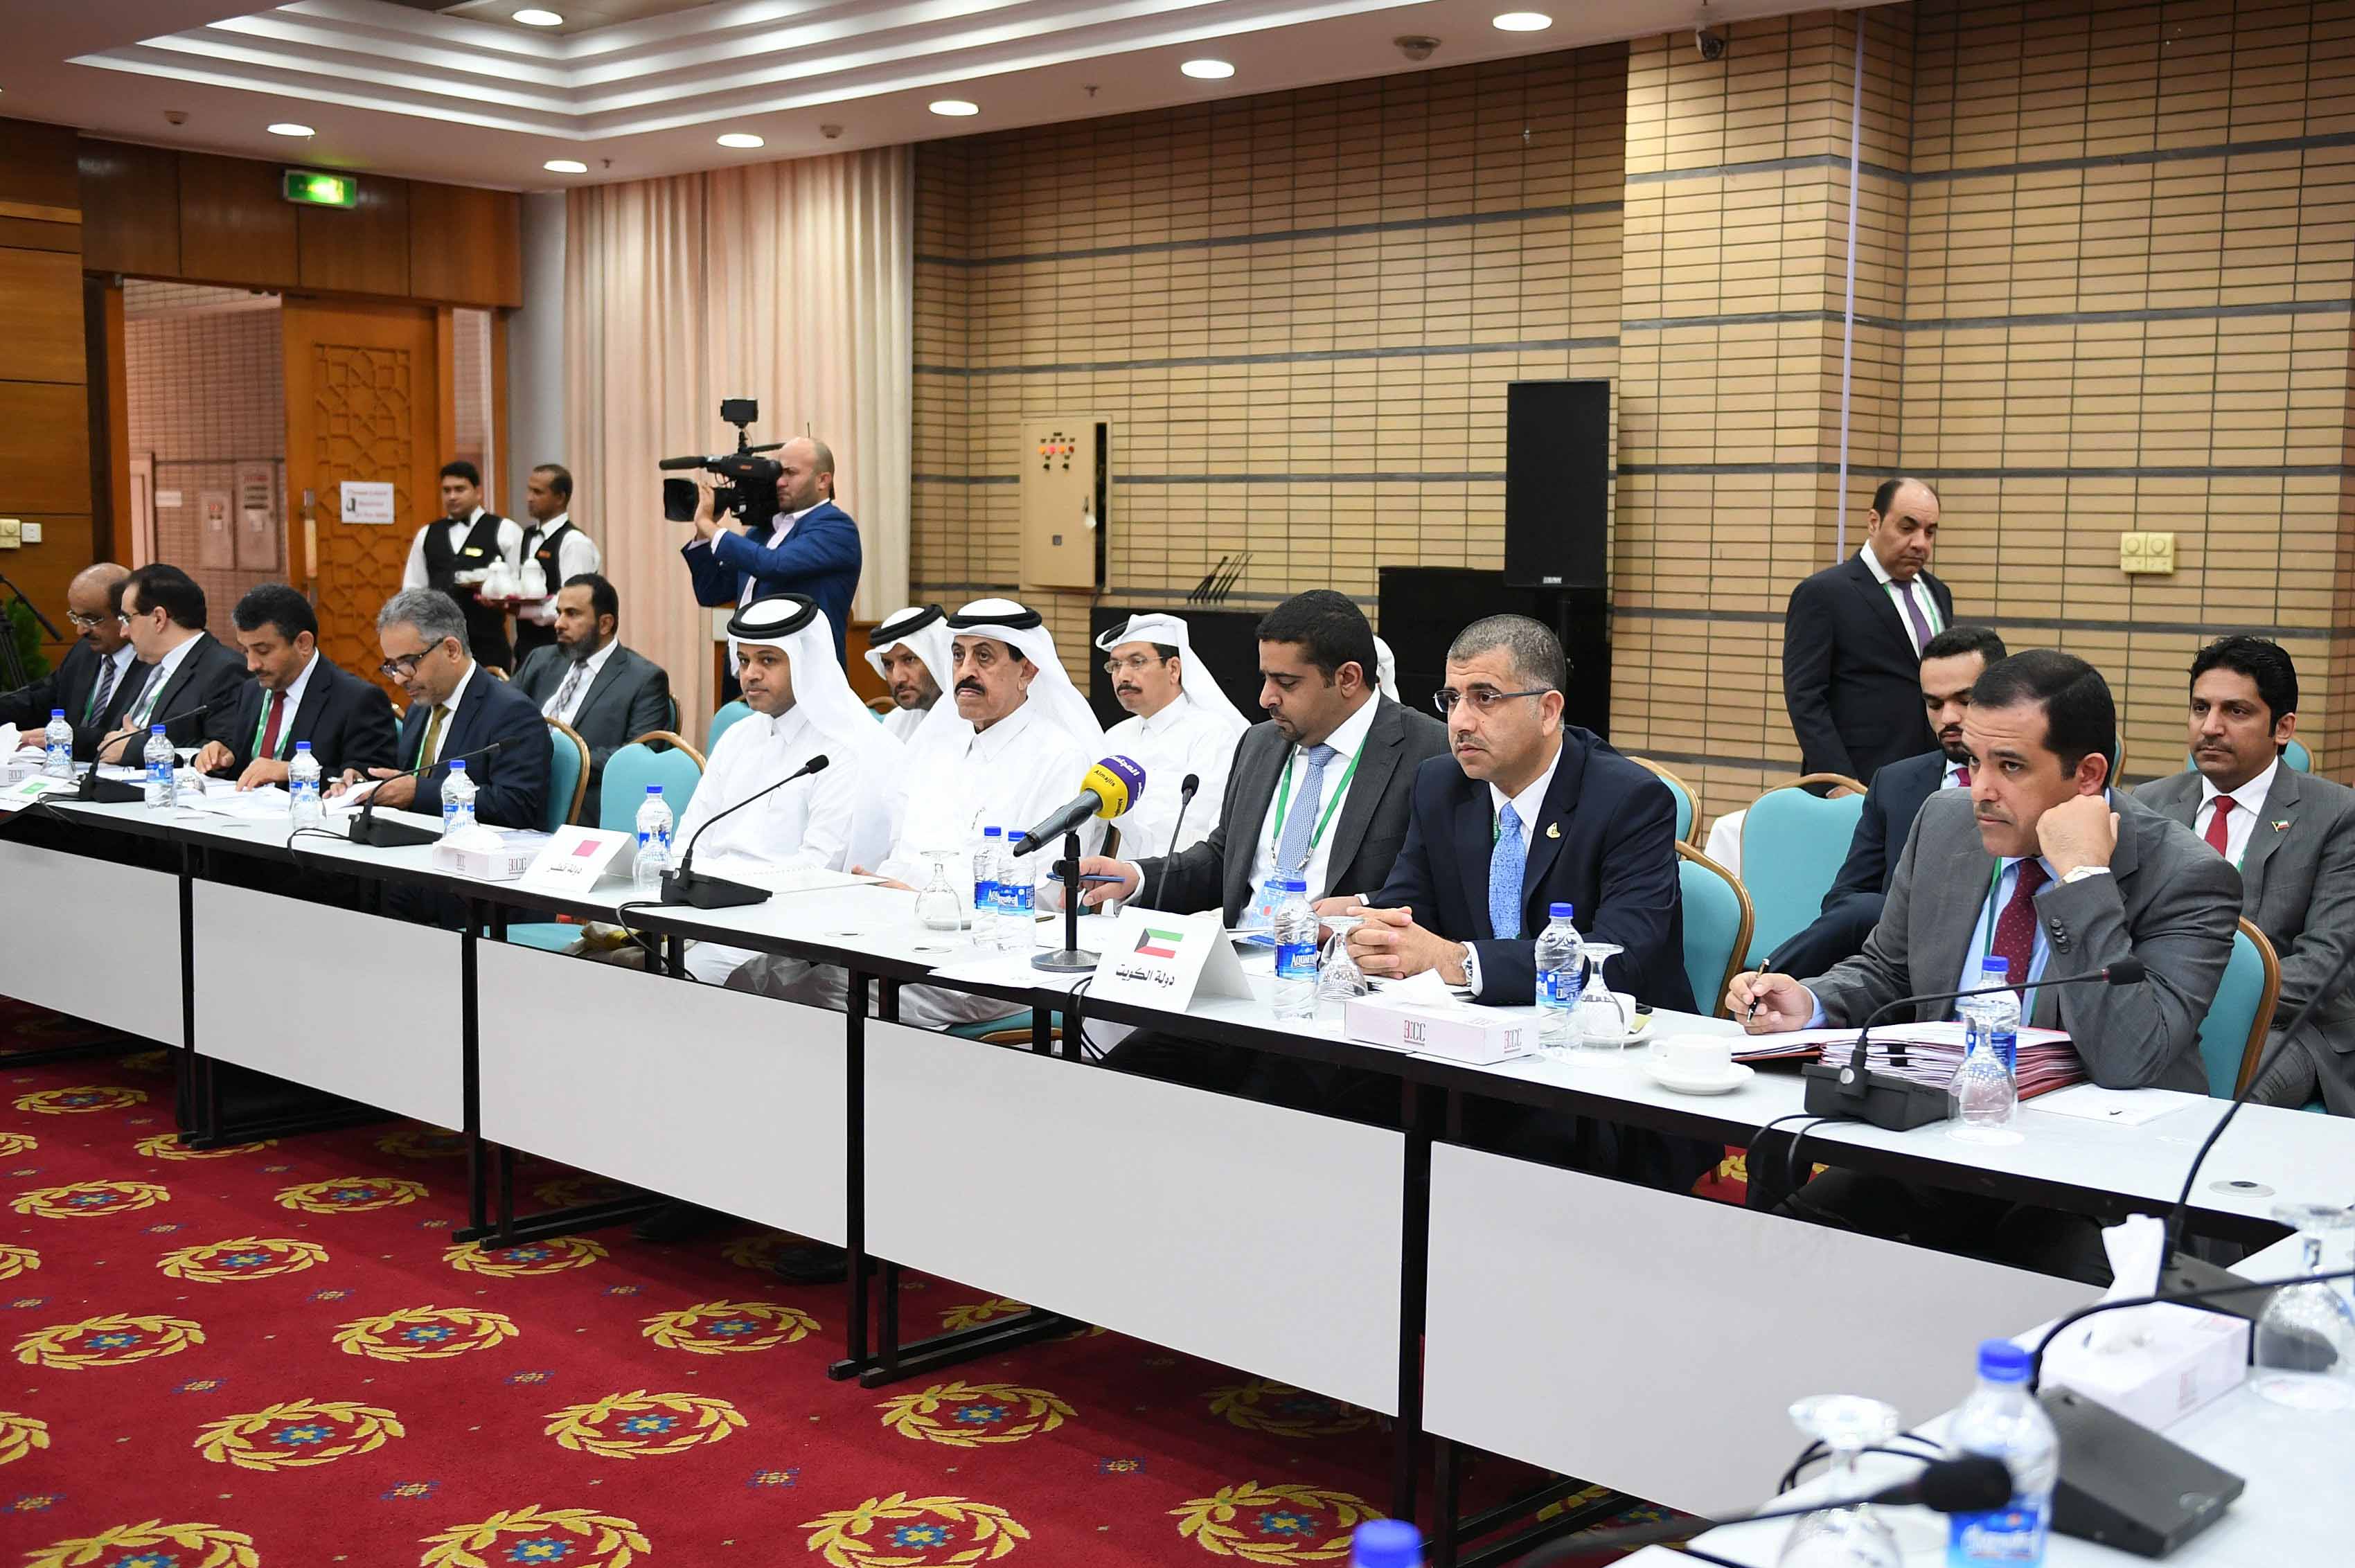 Kuwaiti parliamentary delegation taks part in the IPU conference